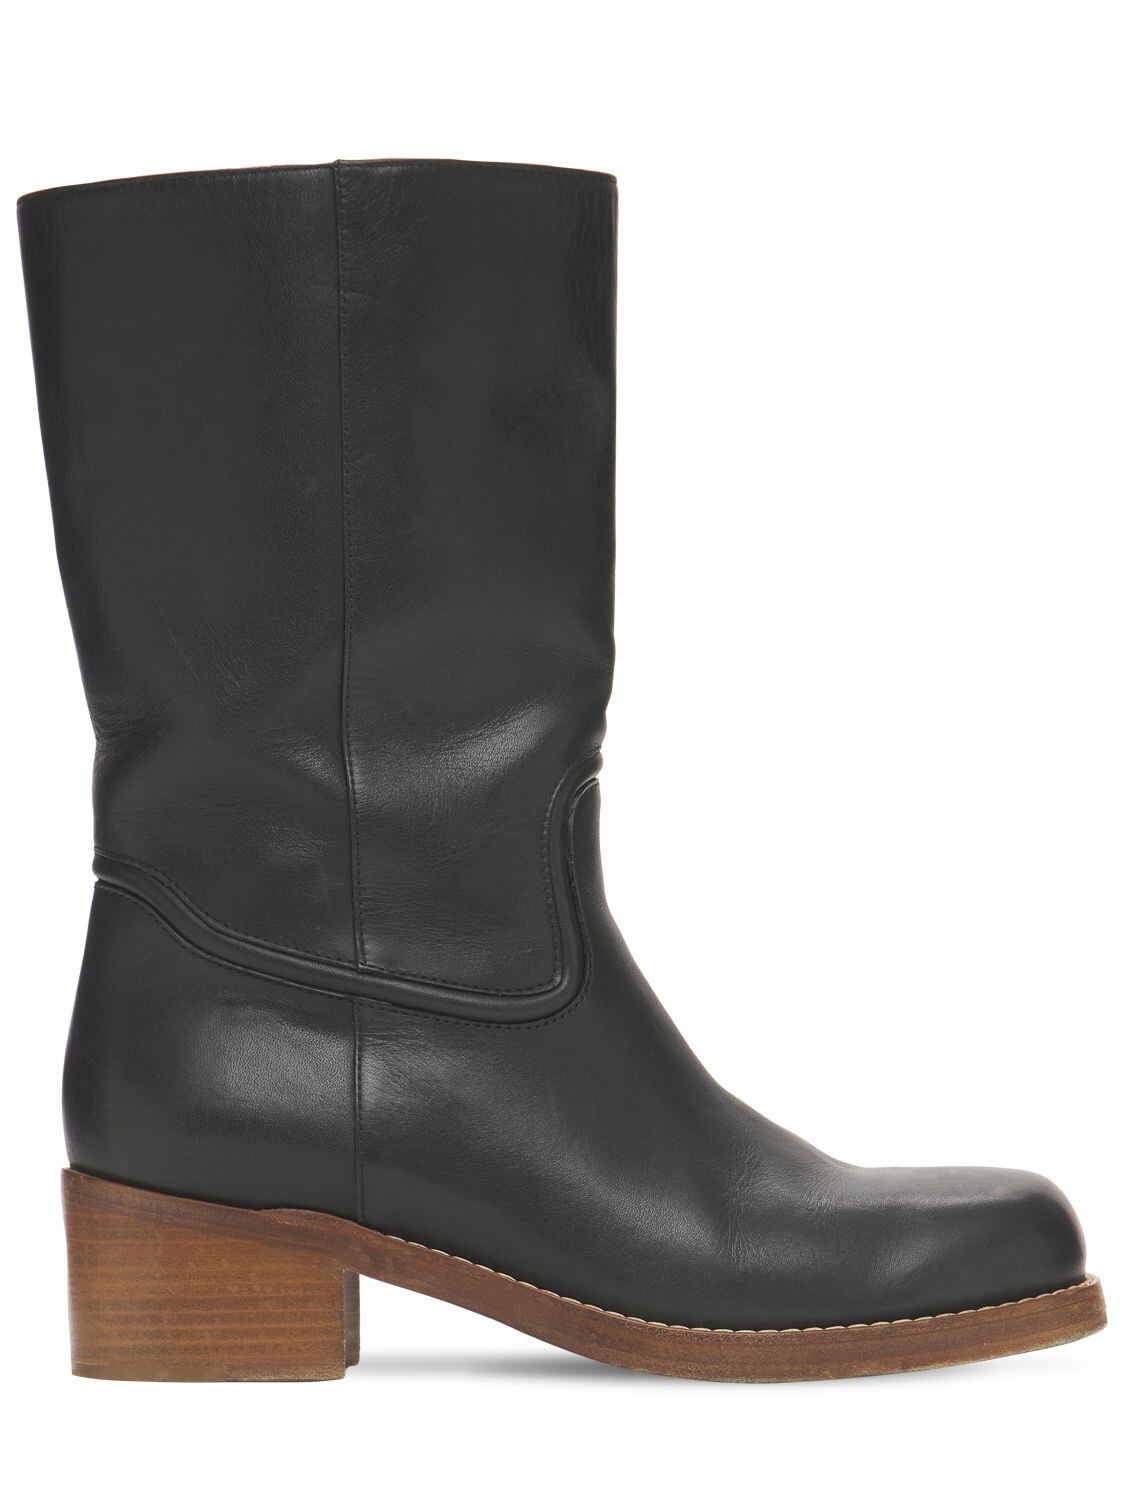 50mm Duane Leather Ankle Boots